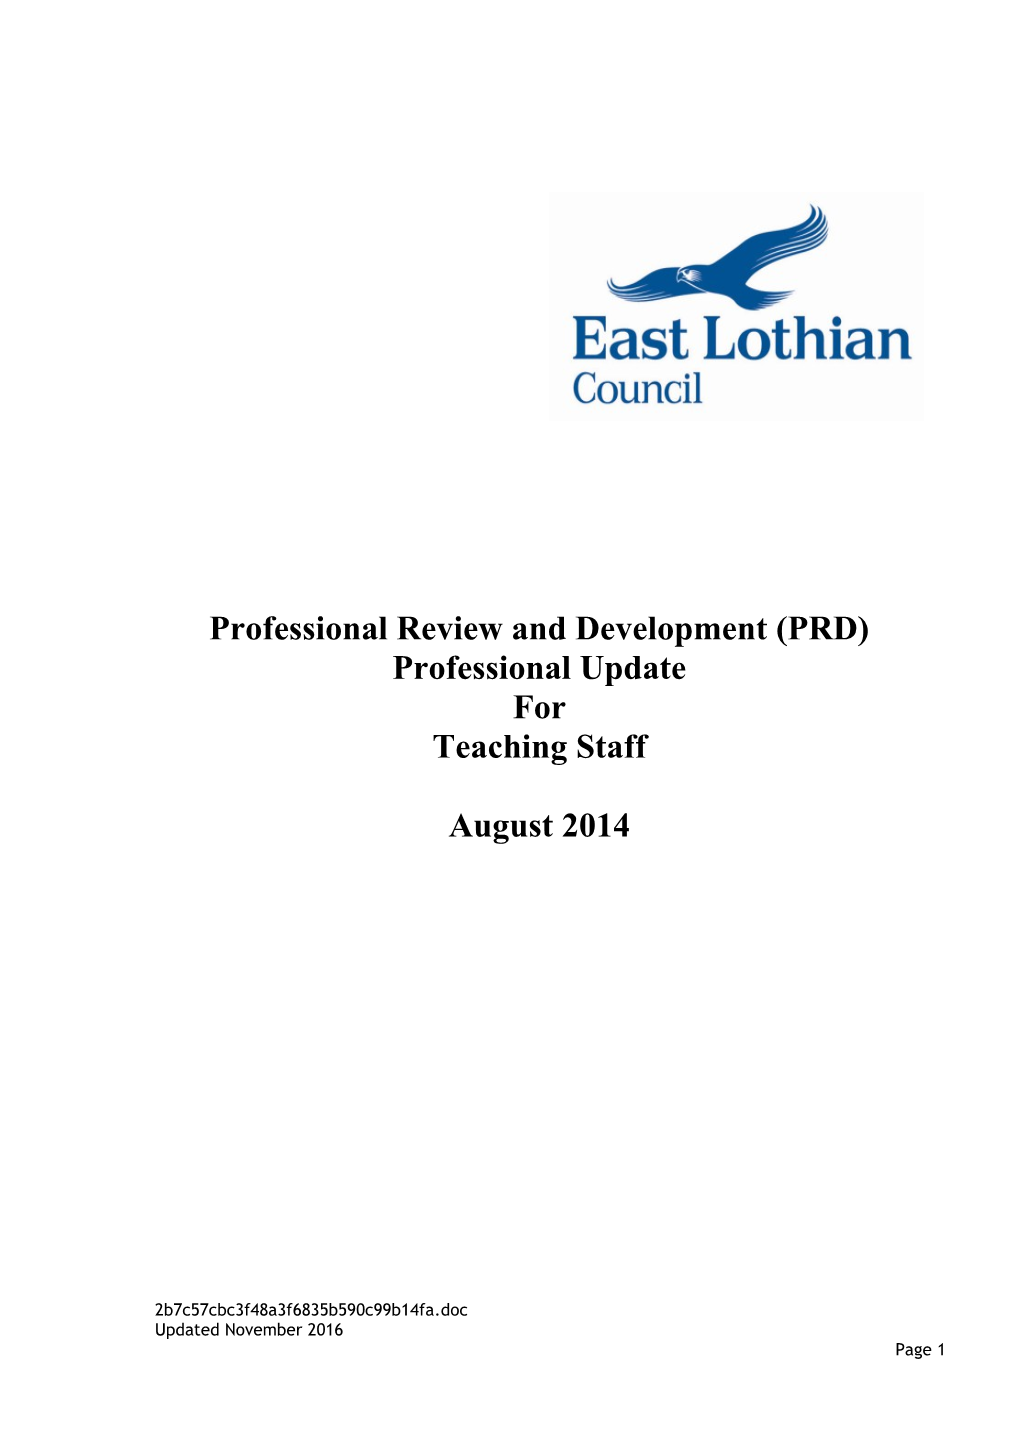 Professional Review and Development (PRD) Professional Update